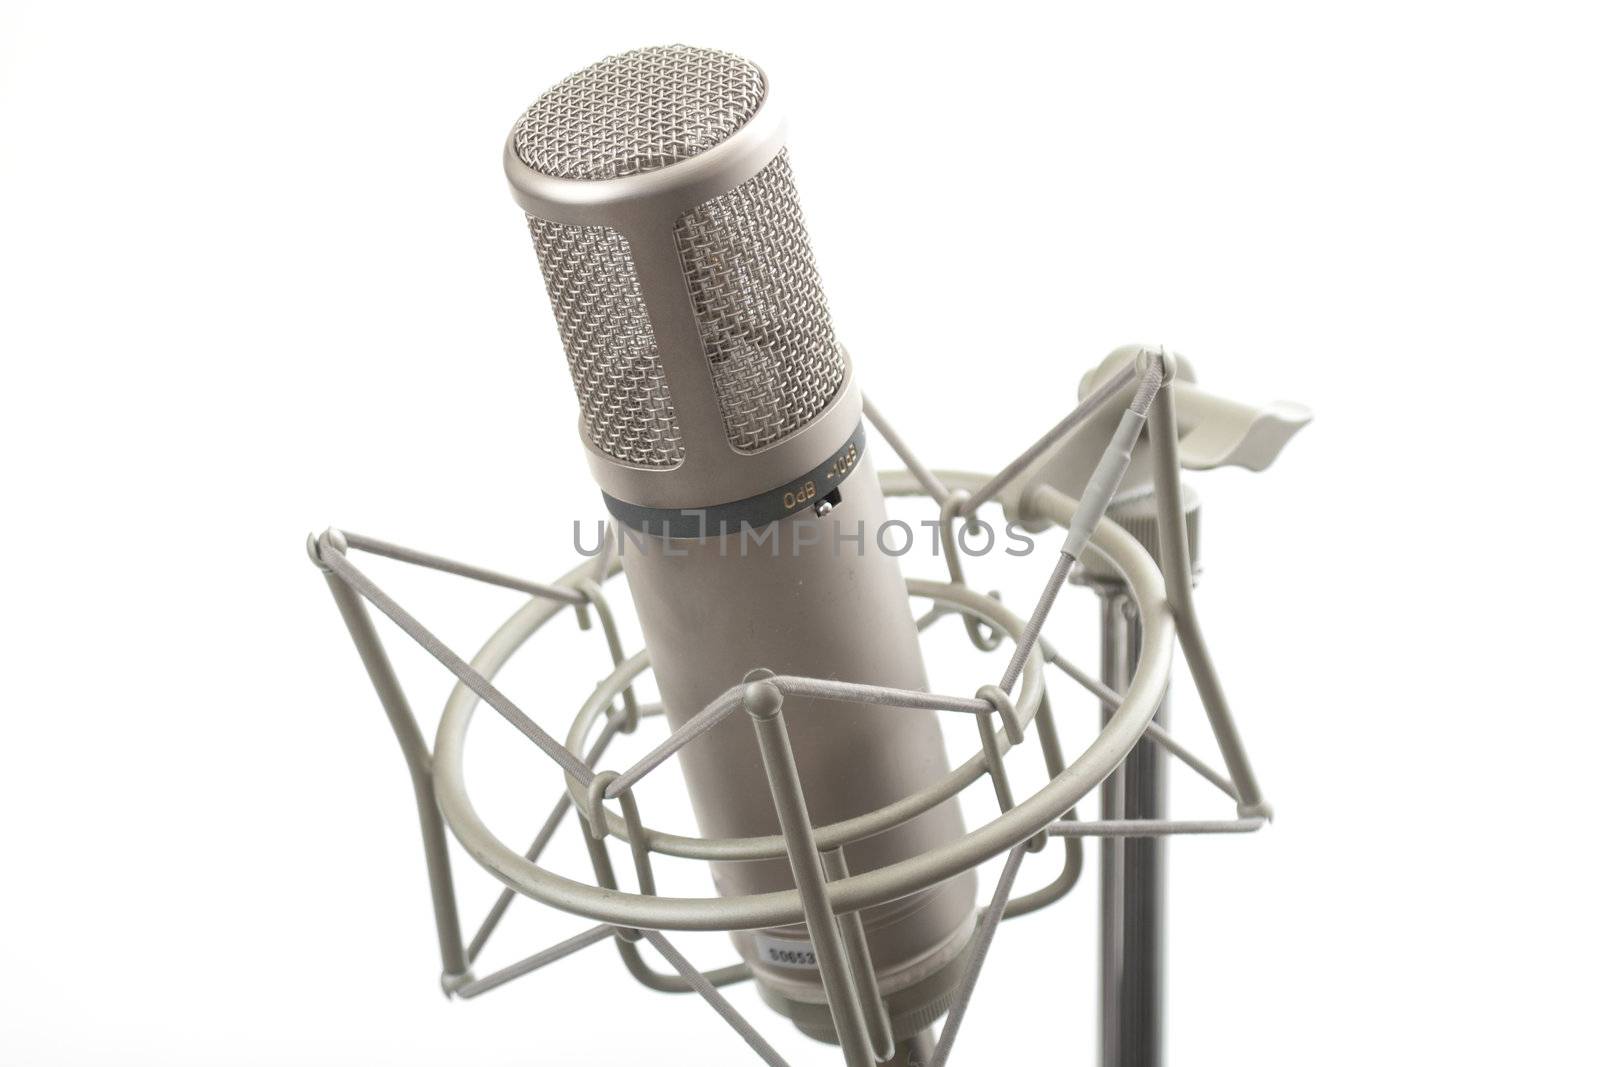 Studio microphone on stand with shock mount